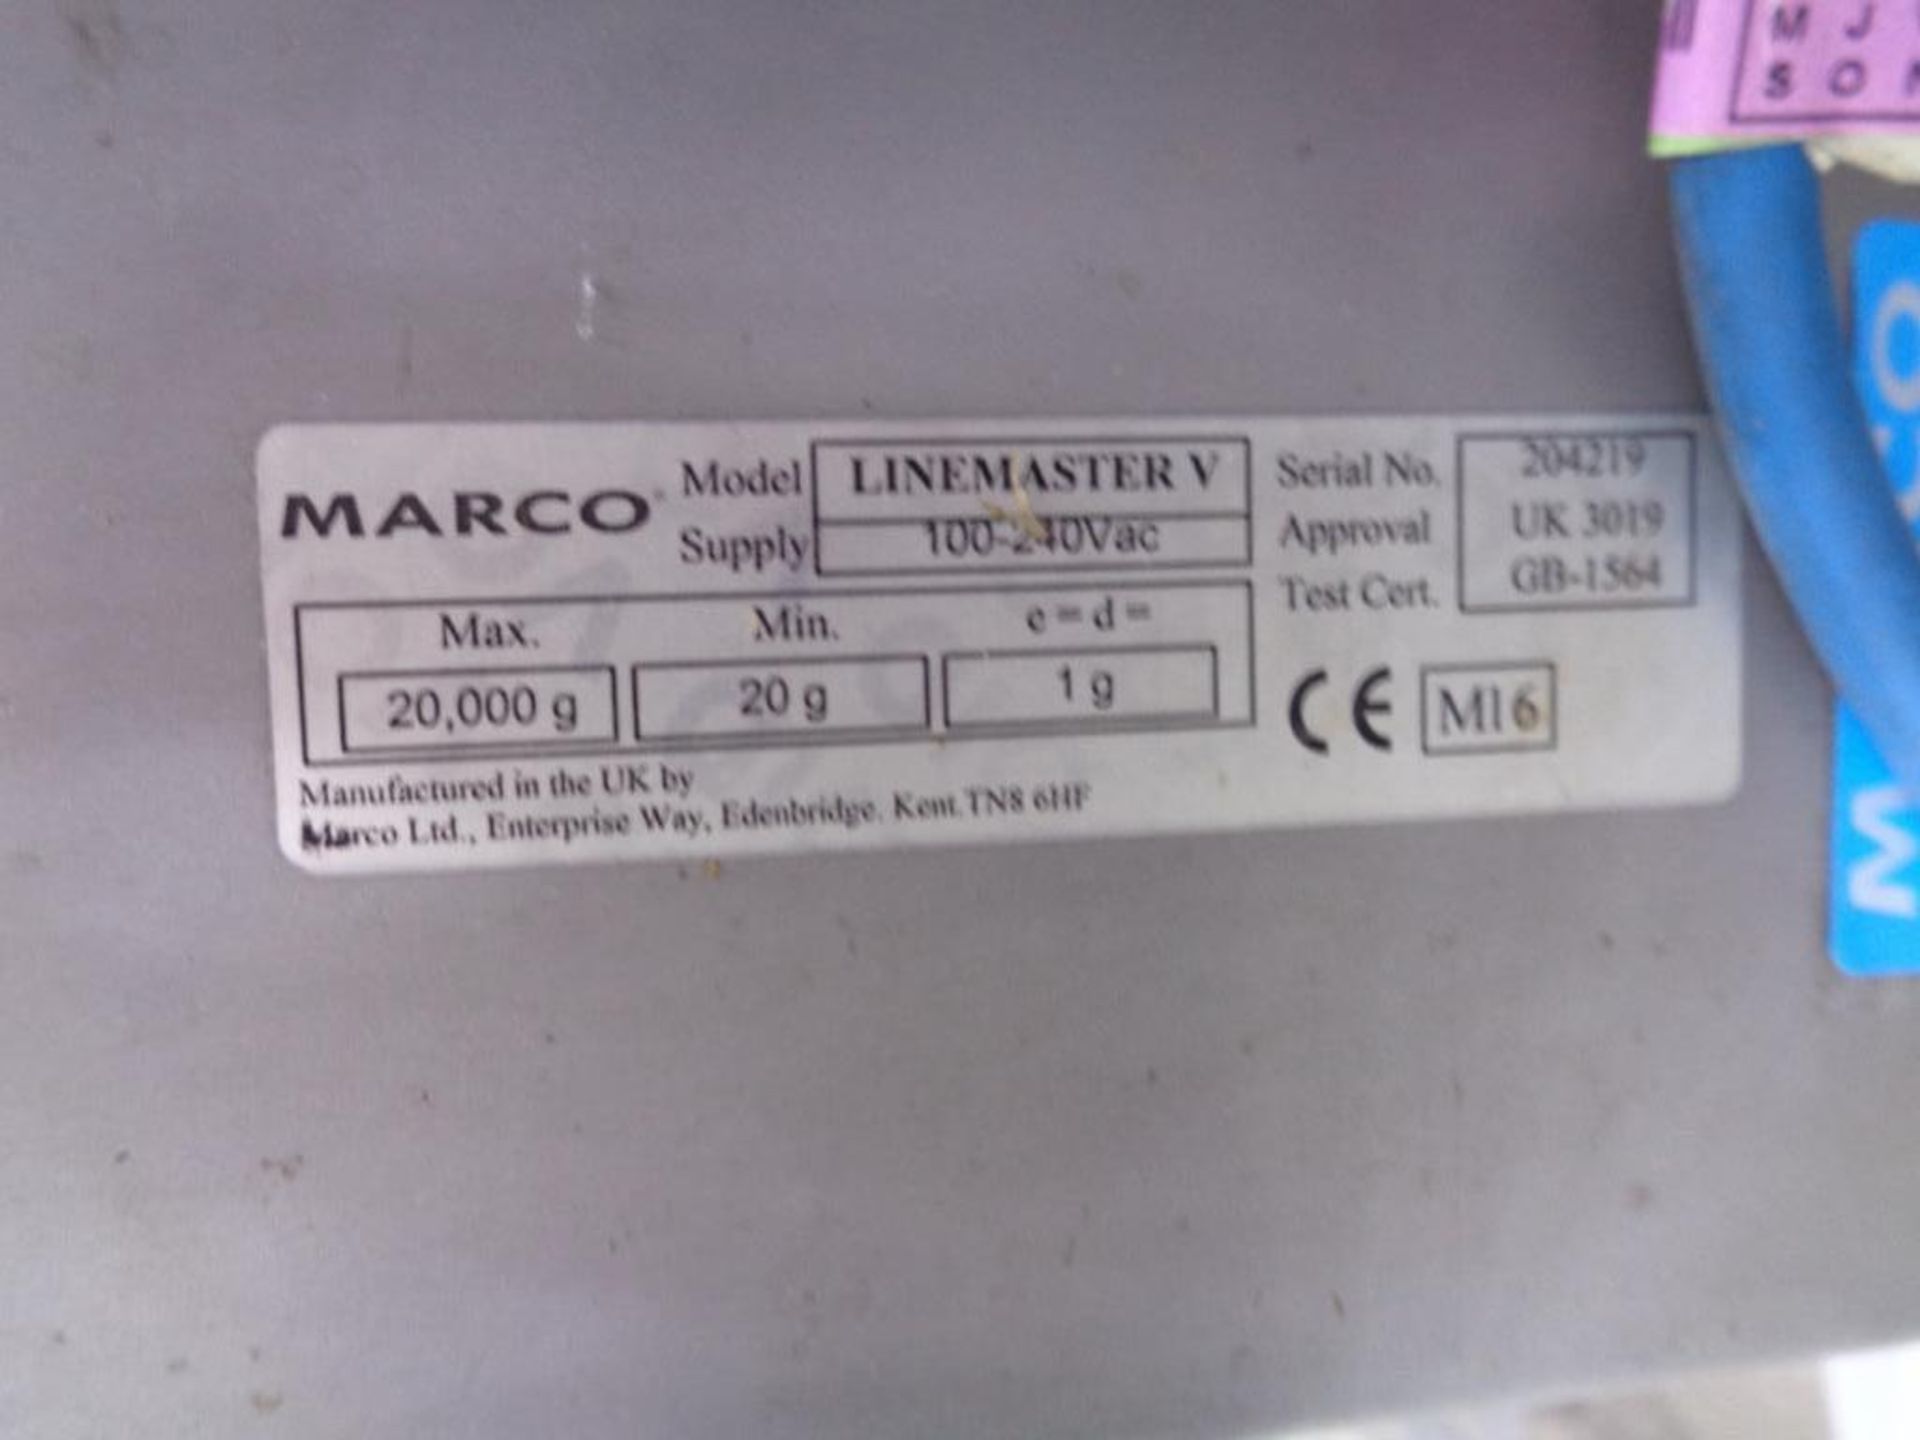 Marco Linemaster V D103471 stainless steel product weigh scales - Image 4 of 4